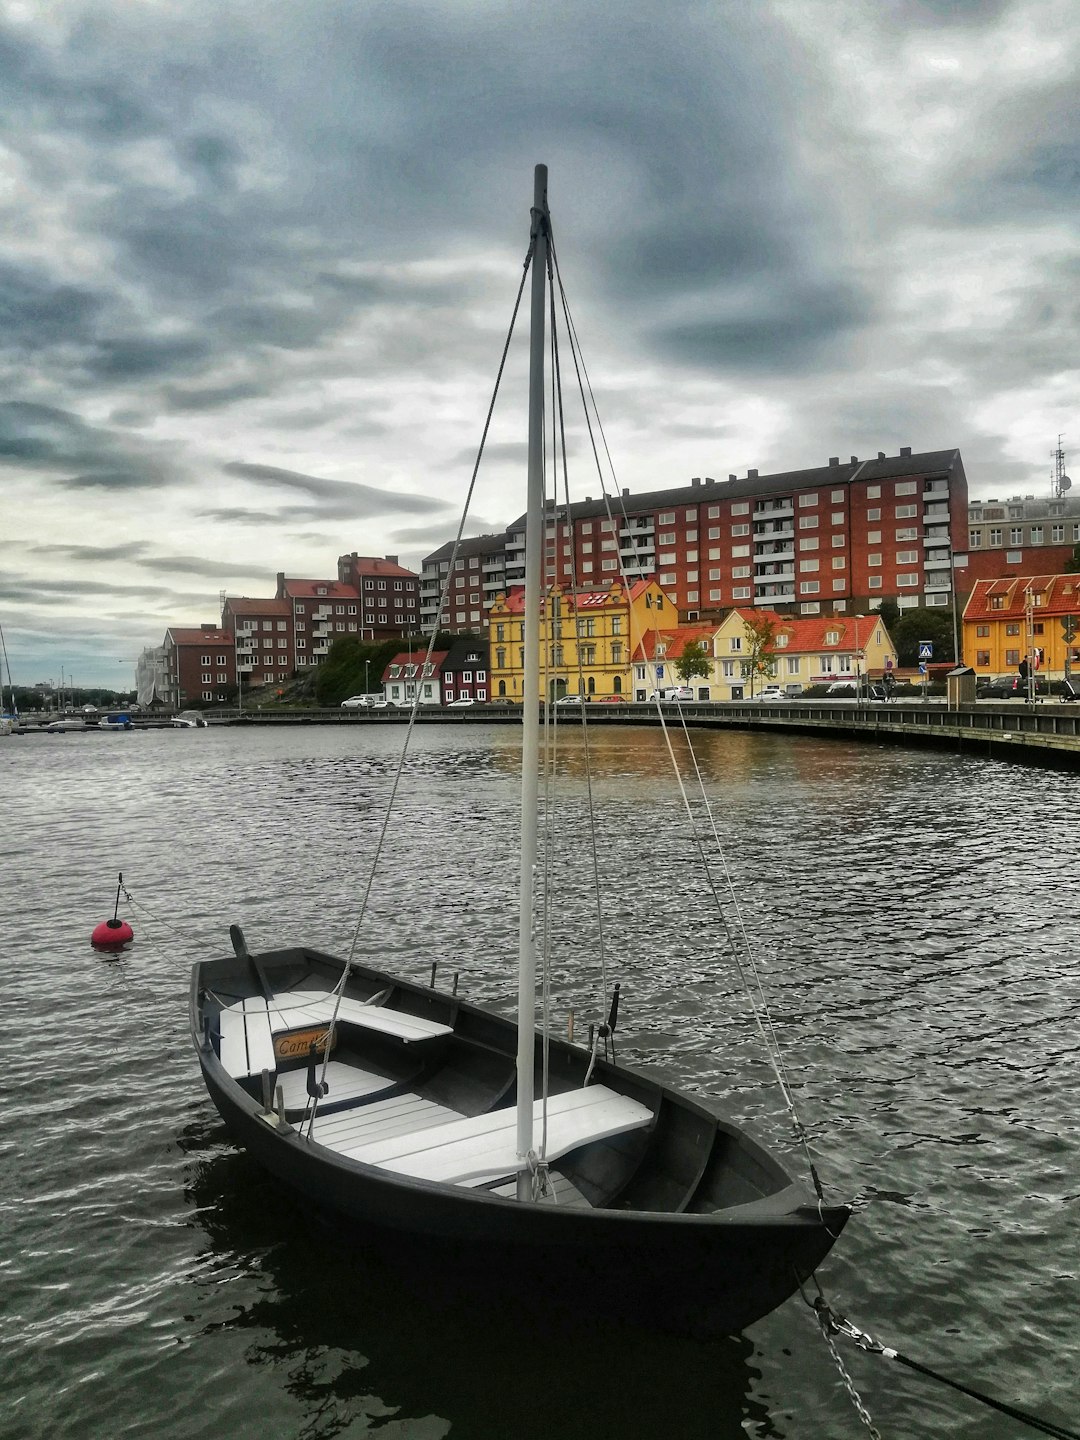 Travel Tips and Stories of Karlskrona in Sweden